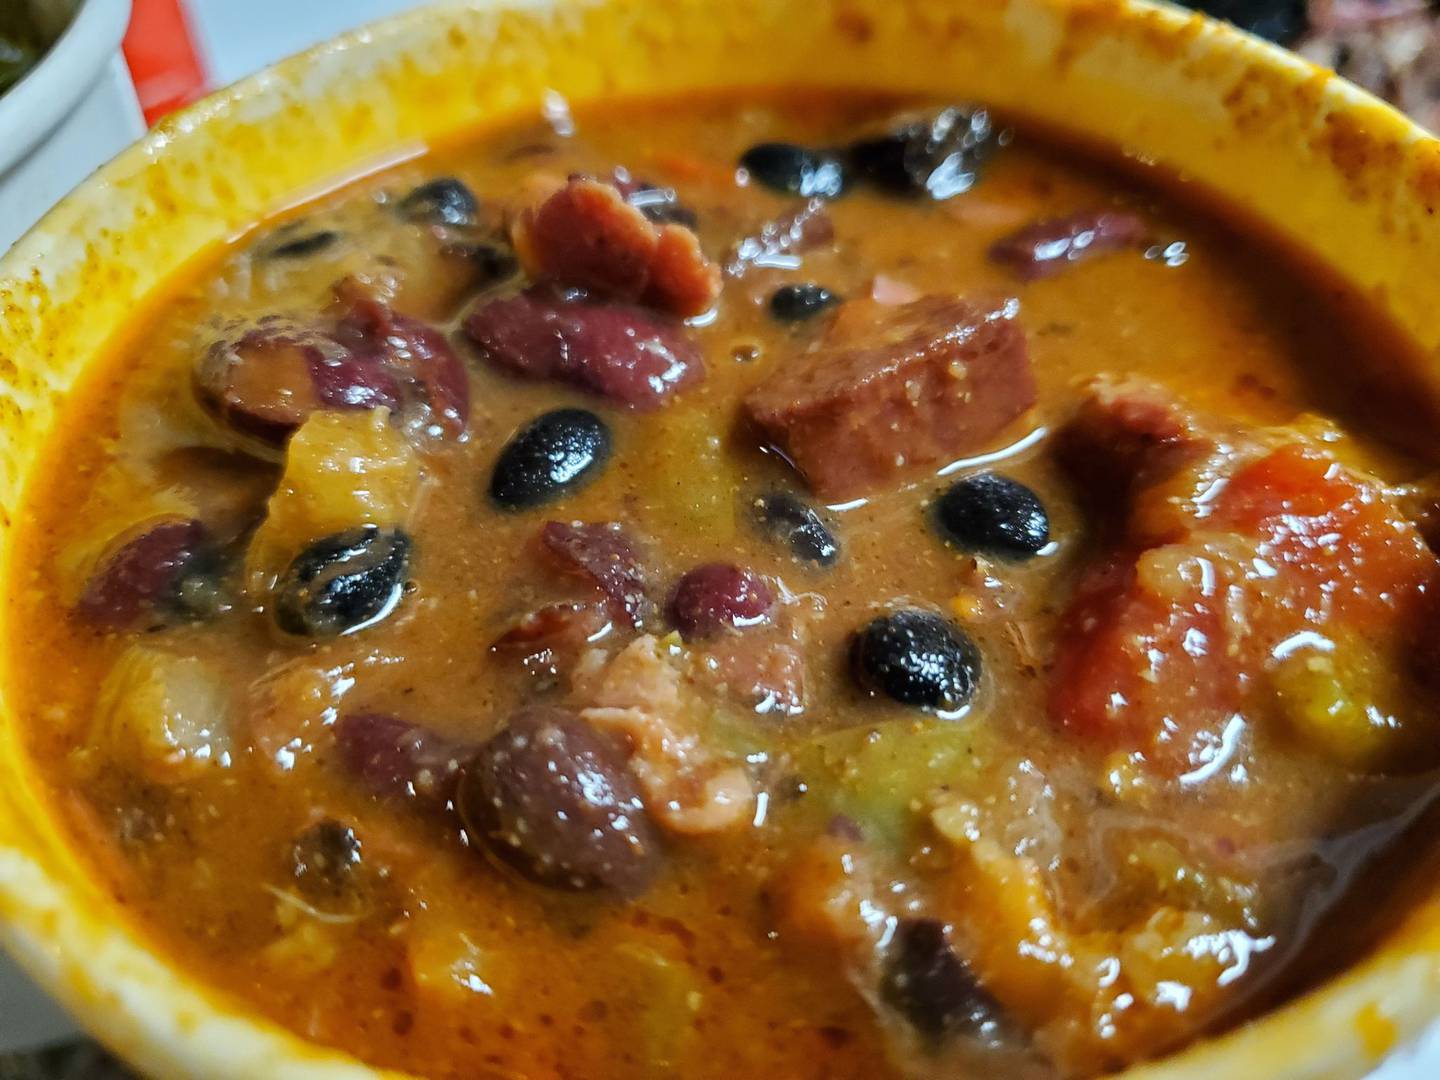 Station One Smokehouse serves a brisket chili with black beans and tomatoes. If you like spicy food, this dish is for you.